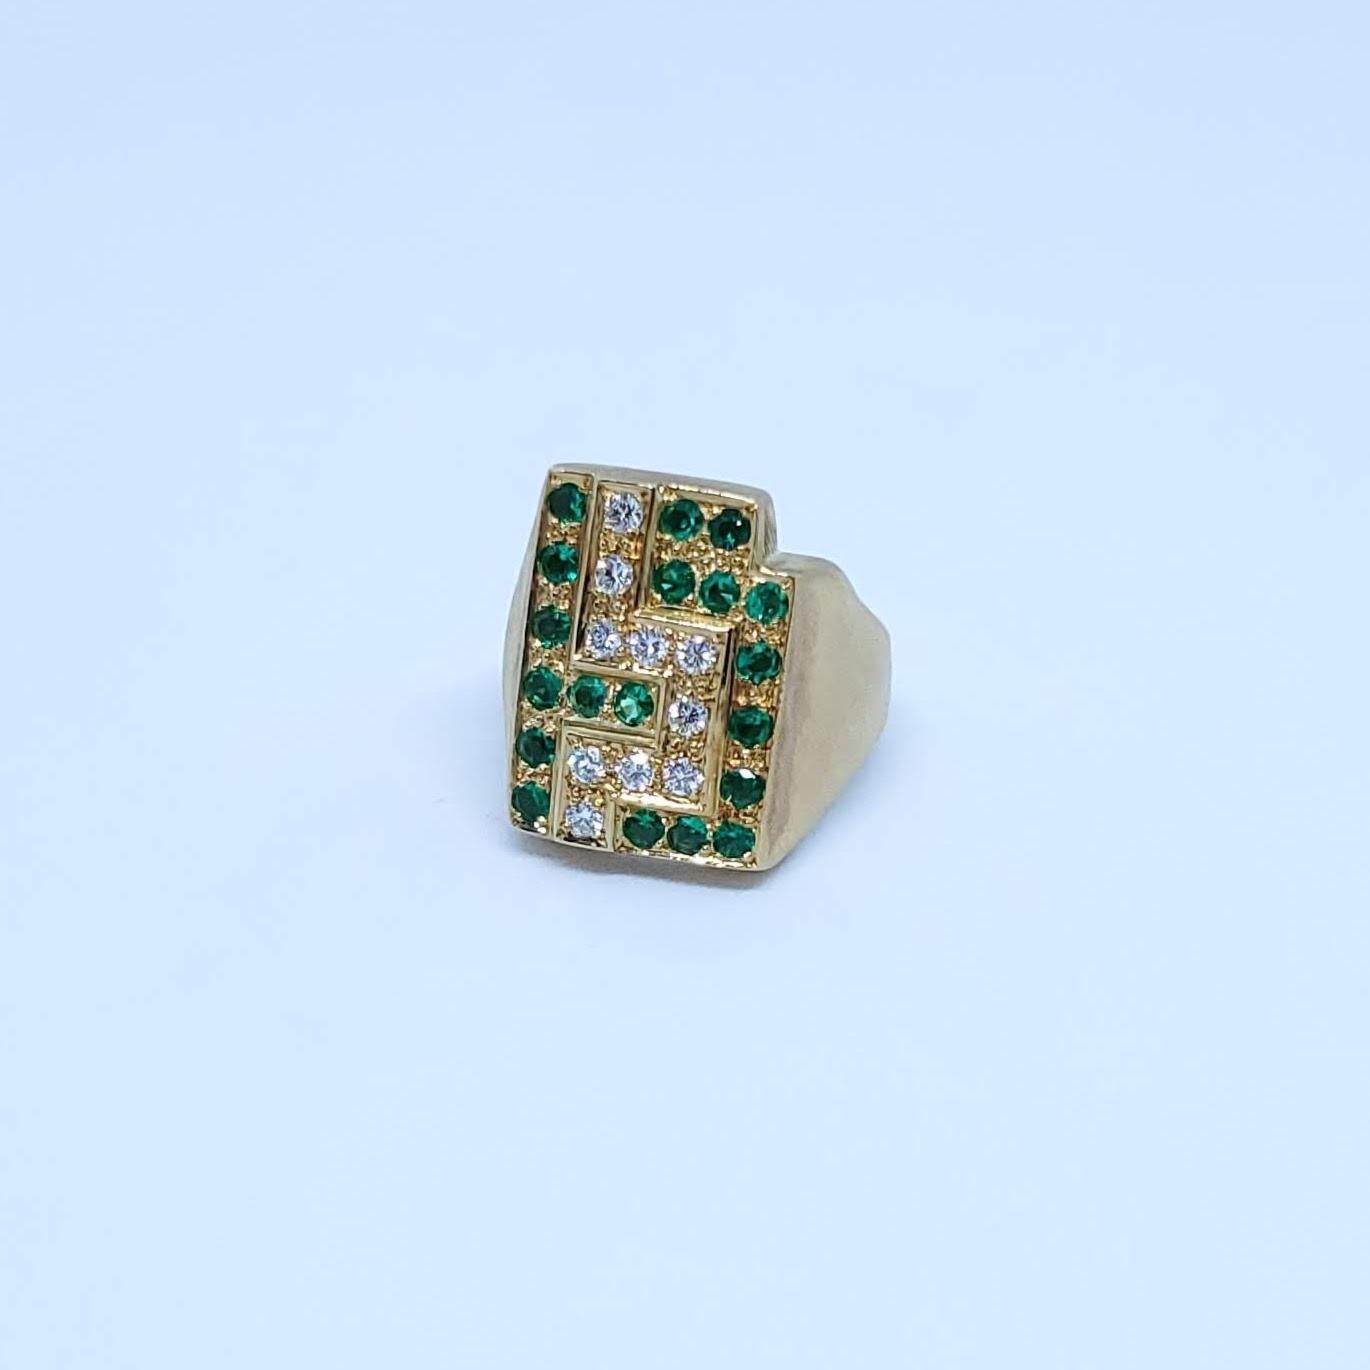 Thanks for taking a look at this Burle Marx Emerald and Diamond Ring. It has 10 diamonds, and 19 emeralds. It is a size 6.5, and can be sized up or down up to 2 sizes. The face of the ring measures .70 inches H by .53 inches W. 

Burle Marx, without